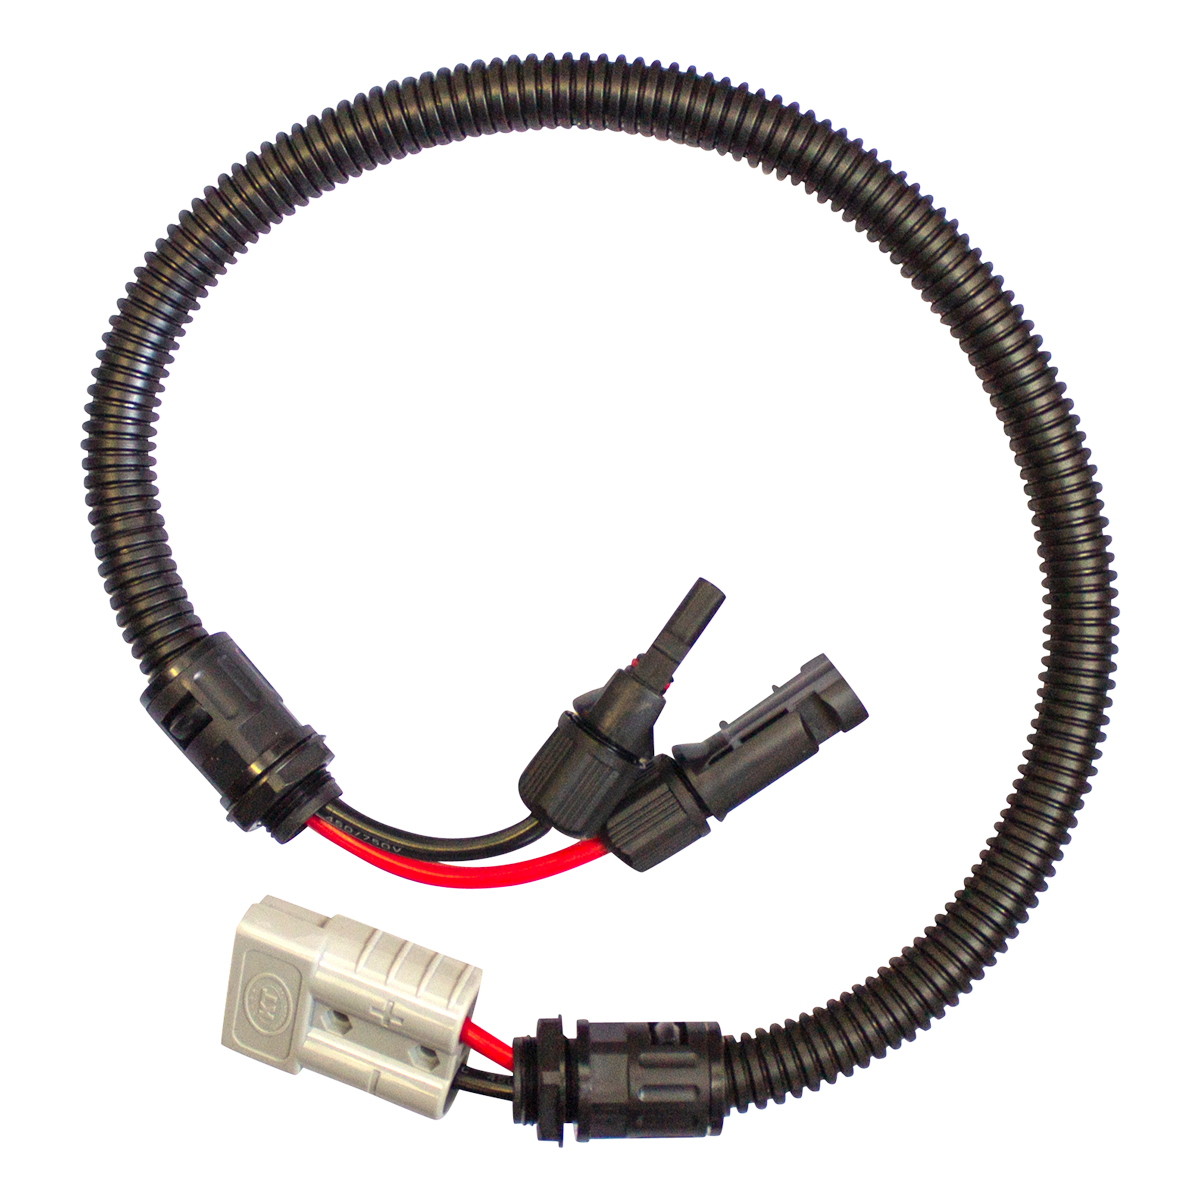 KT Cables MC4 To 50AConnector with 600mm Lead